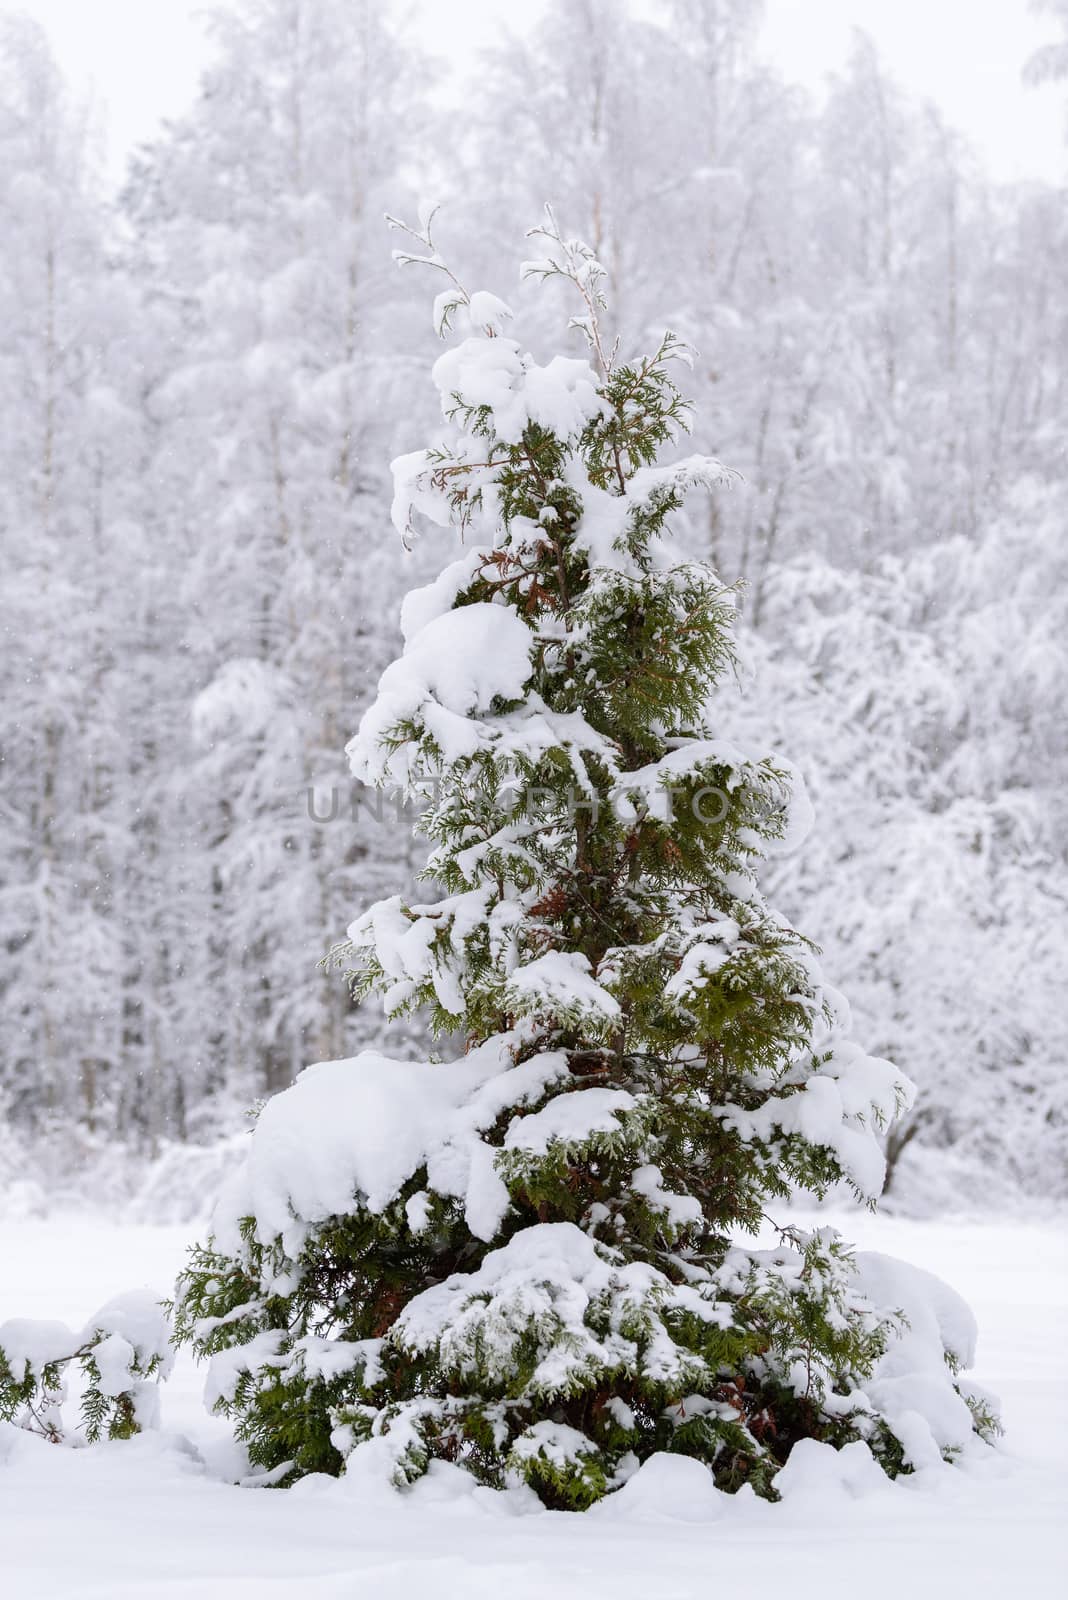 The big tree has covered with heavy snow in winter season at Lapland, Finland.